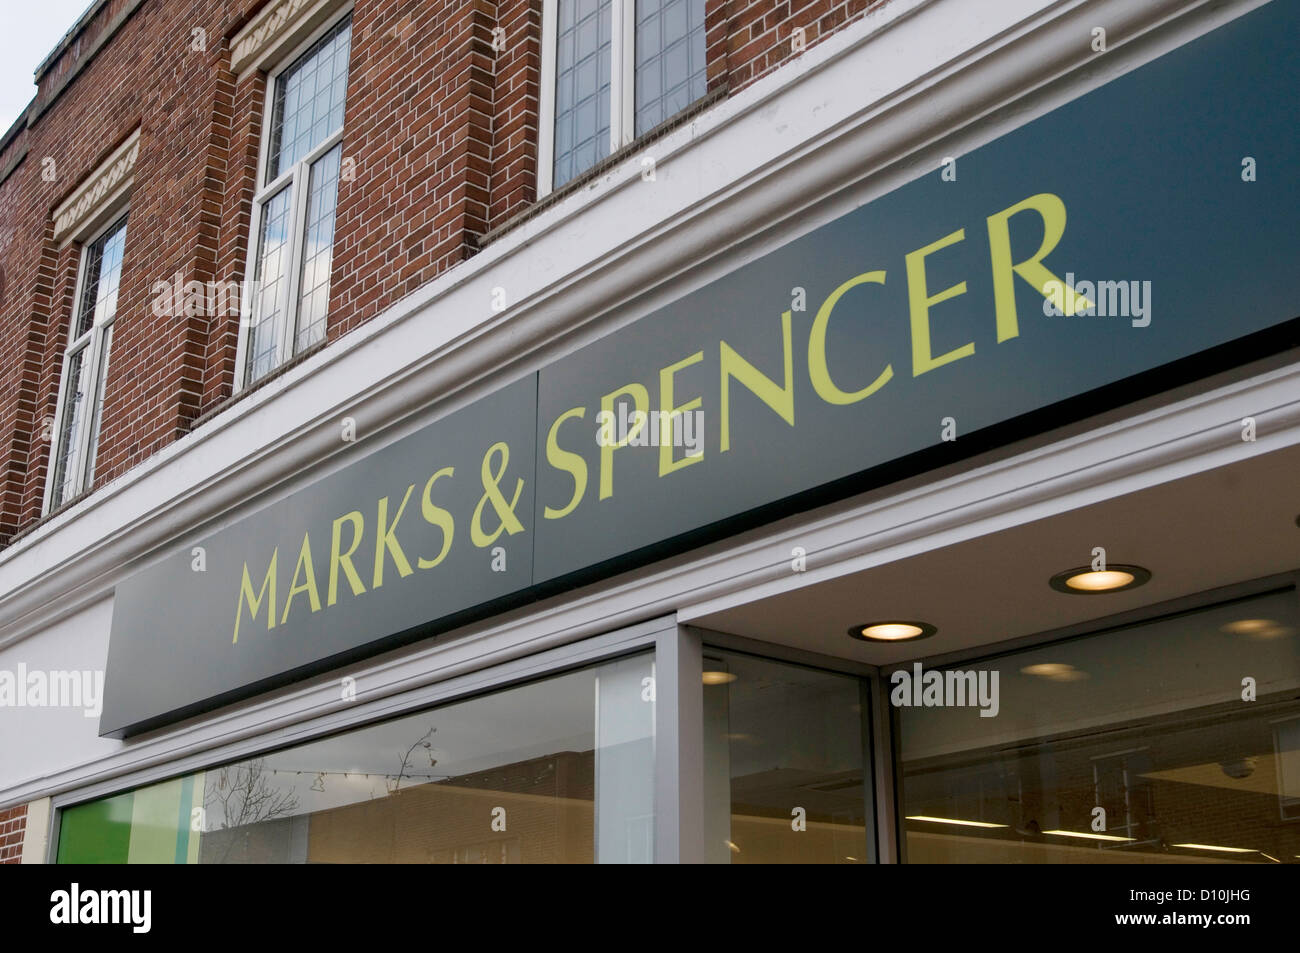 Marks And Spencers High Resolution Stock Photography and Images - Alamy